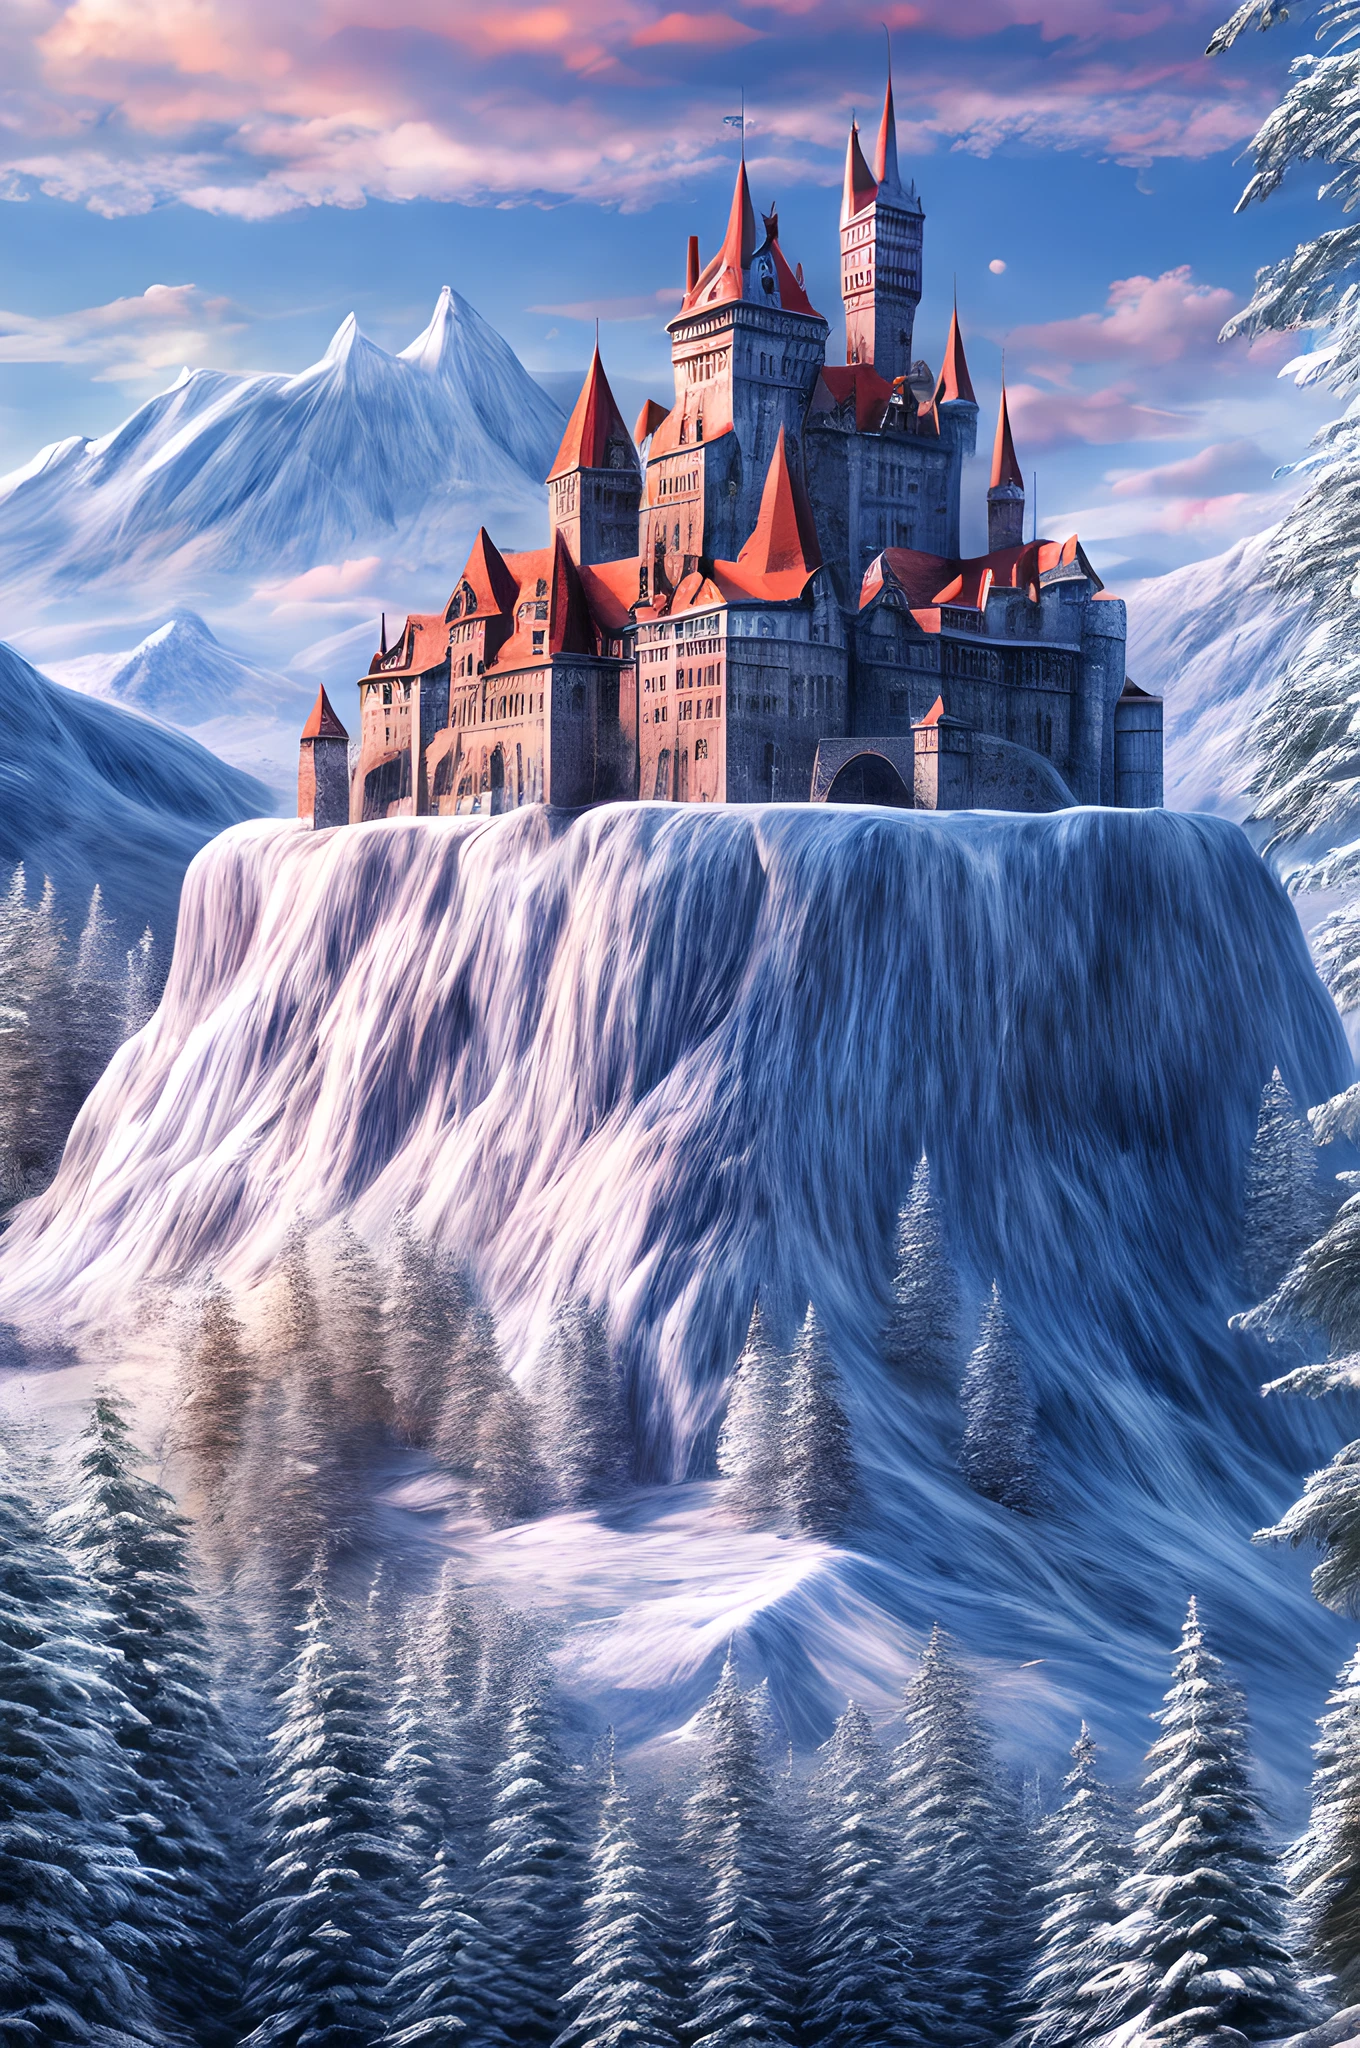 a panoramic award winning photography, Photorealistic, extremely detailed of a castle made from [[ice]] made_of_ice standing on the peak of a snowy mountain, an impressive best detailed castle made from ice (Photorealistic, extremely detailed), with towers, bridges, a moat filled with lava (Photorealistic, extremely detailed),  standing on top of a snowy mountain (masterpiece, extremely detailed, best quality), with pine trees, sunset light, some clouds in the air,  alpine mountain range background, best realistic, best details, best quality, 16k, [ultra detailed], masterpiece, best quality, (extremely detailed), ultra wide shot, photorealism, depth of field,